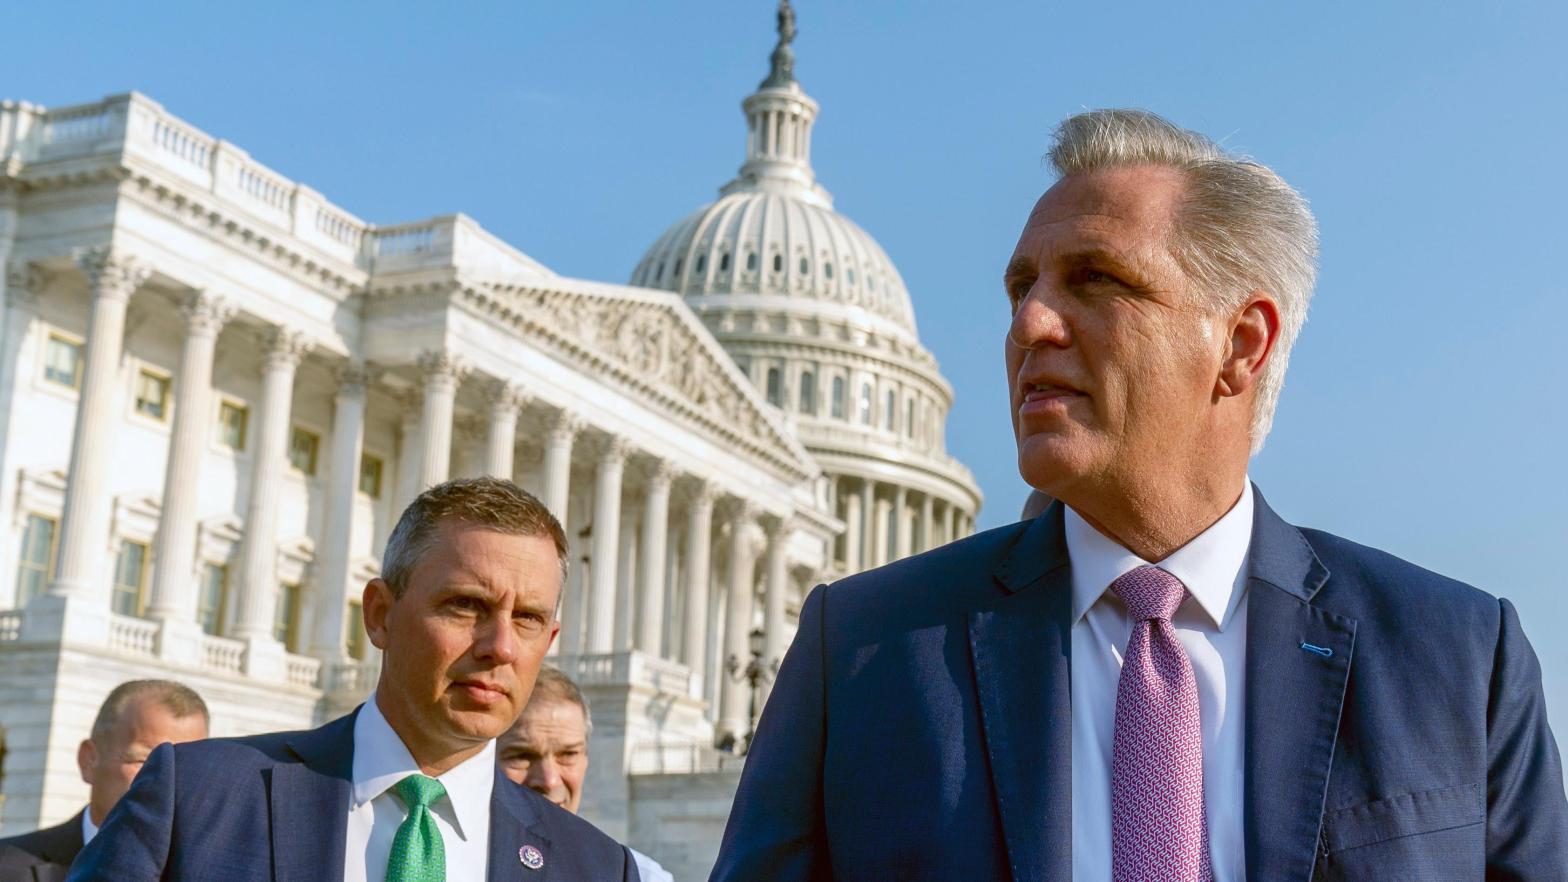 Rep. Kelly Armstrong, a member of the House Subcommittee on Consumer Protection, accompanies House Minority Leader Kevin McCarthy outside for a press conference on Capitol Hill in Washington, Tuesday, July 27, 2021. (Photo: Associated Press, AP)